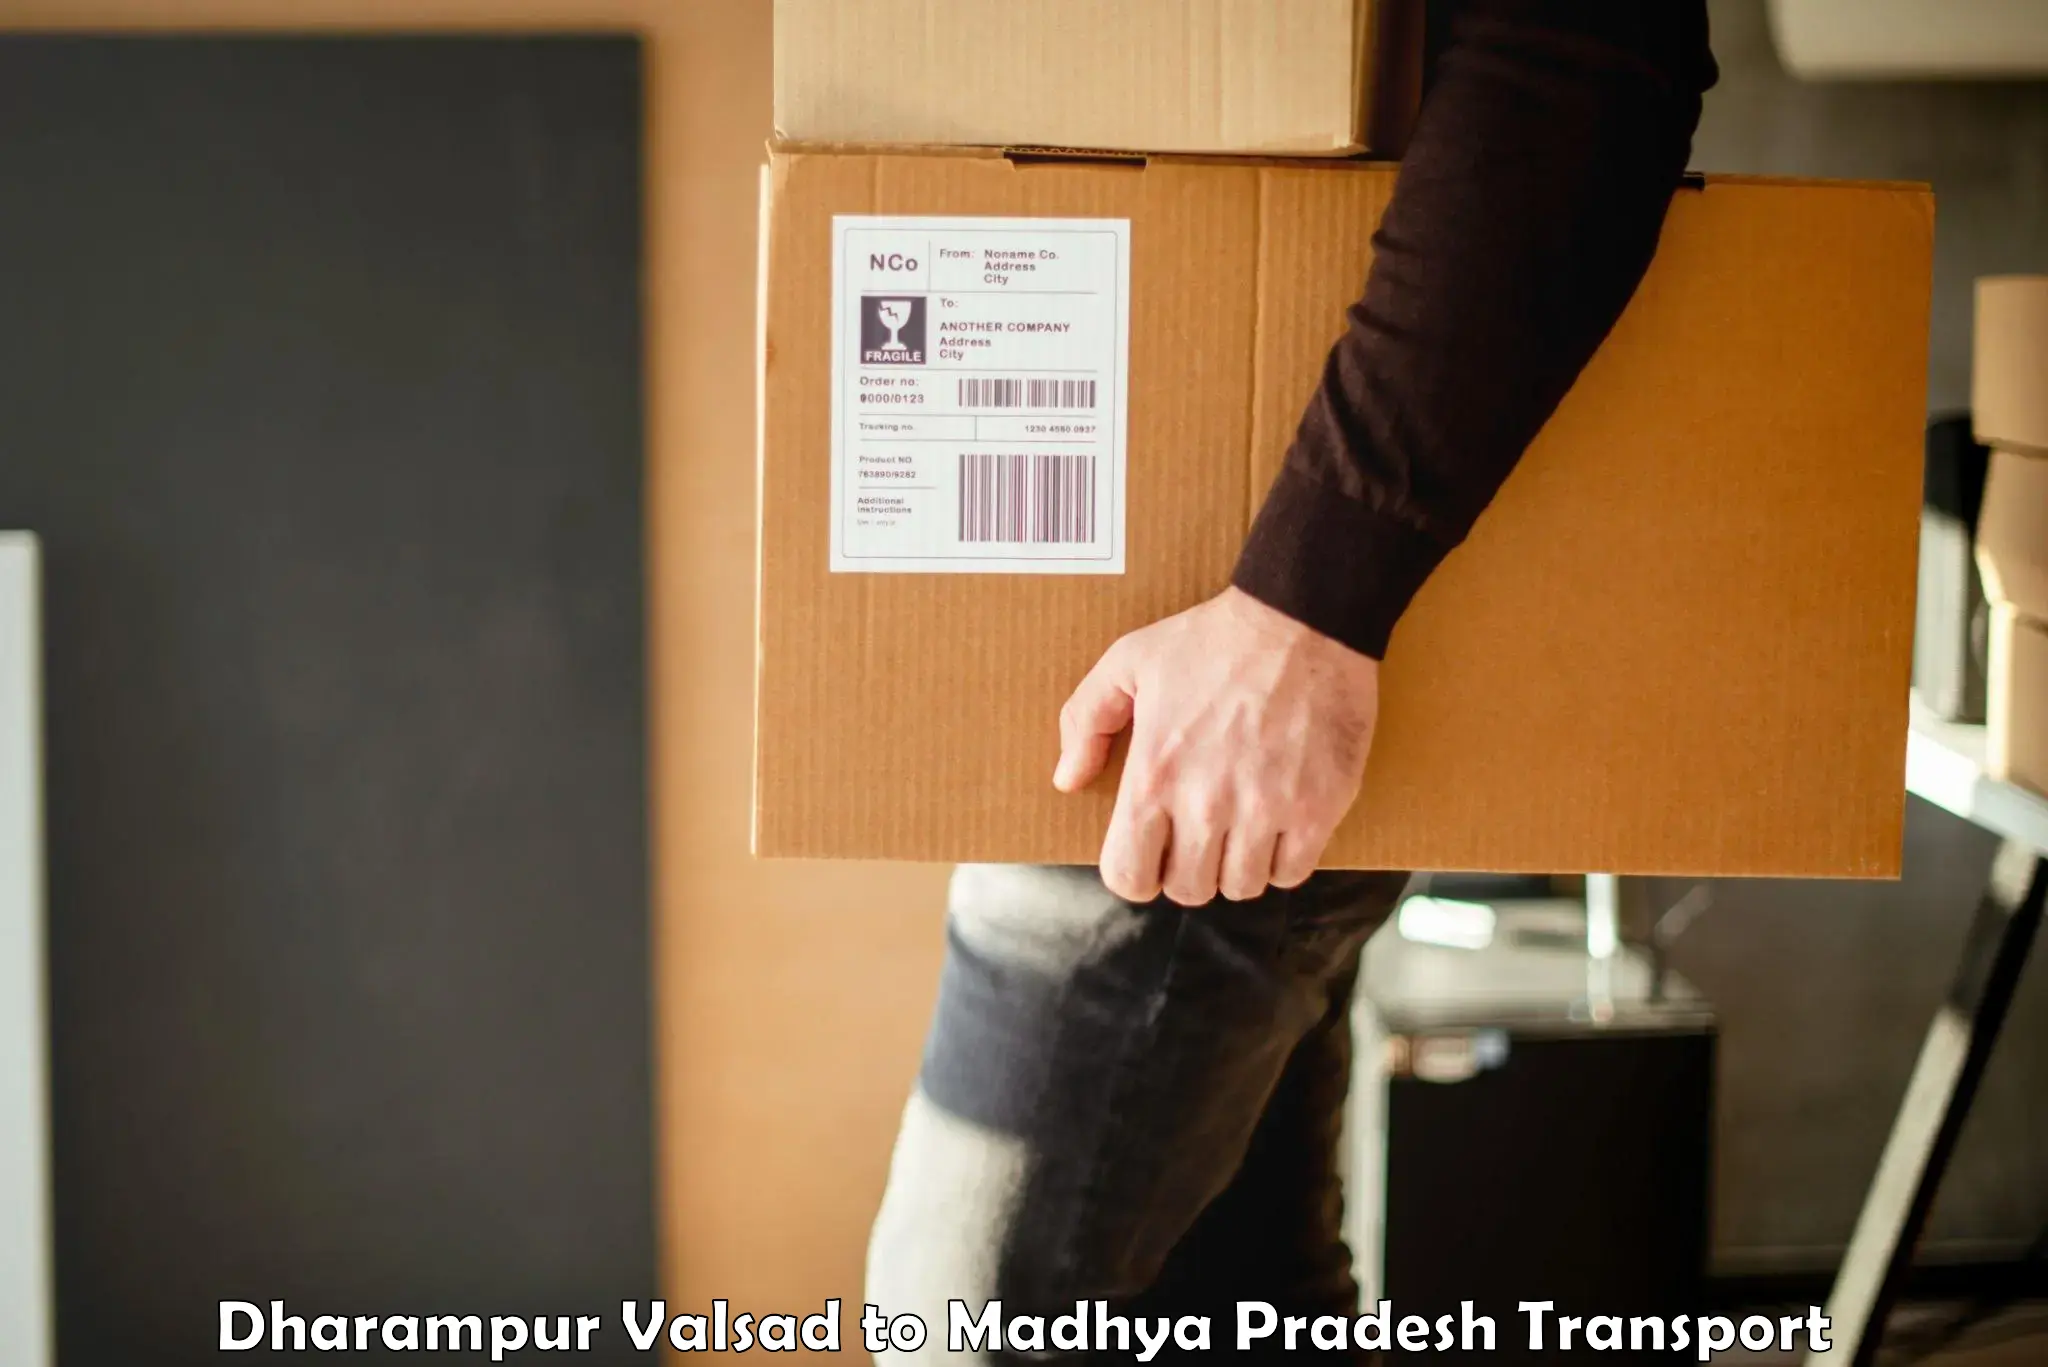 Truck transport companies in India Dharampur Valsad to IIT Indore